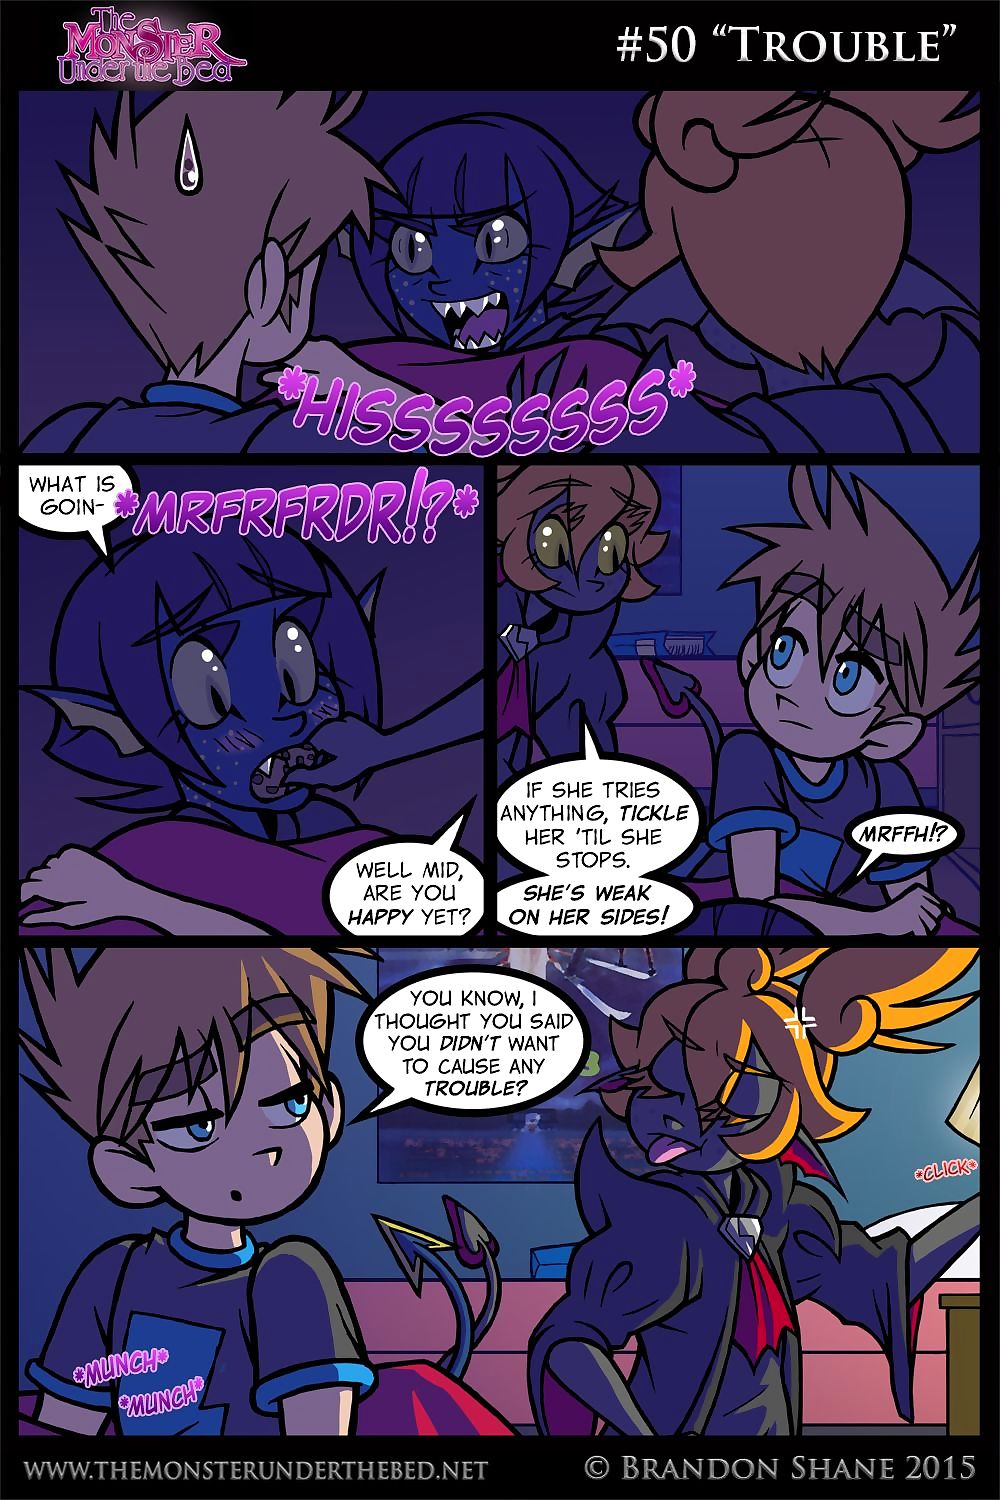 The Monster Under the Bed - part 3